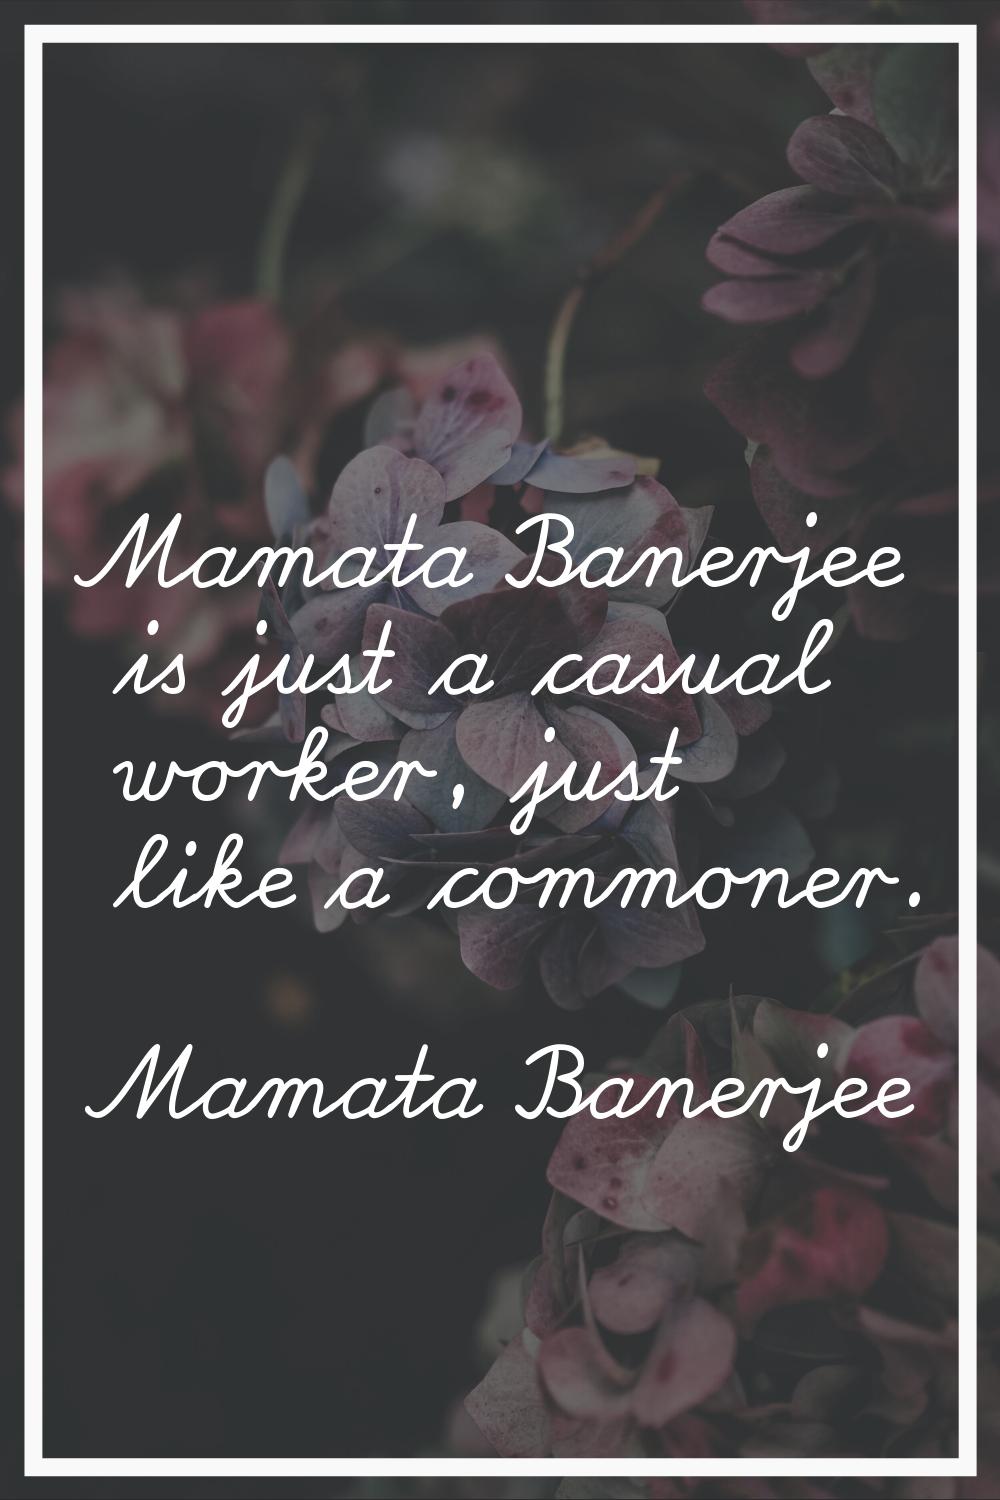 Mamata Banerjee is just a casual worker, just like a commoner.